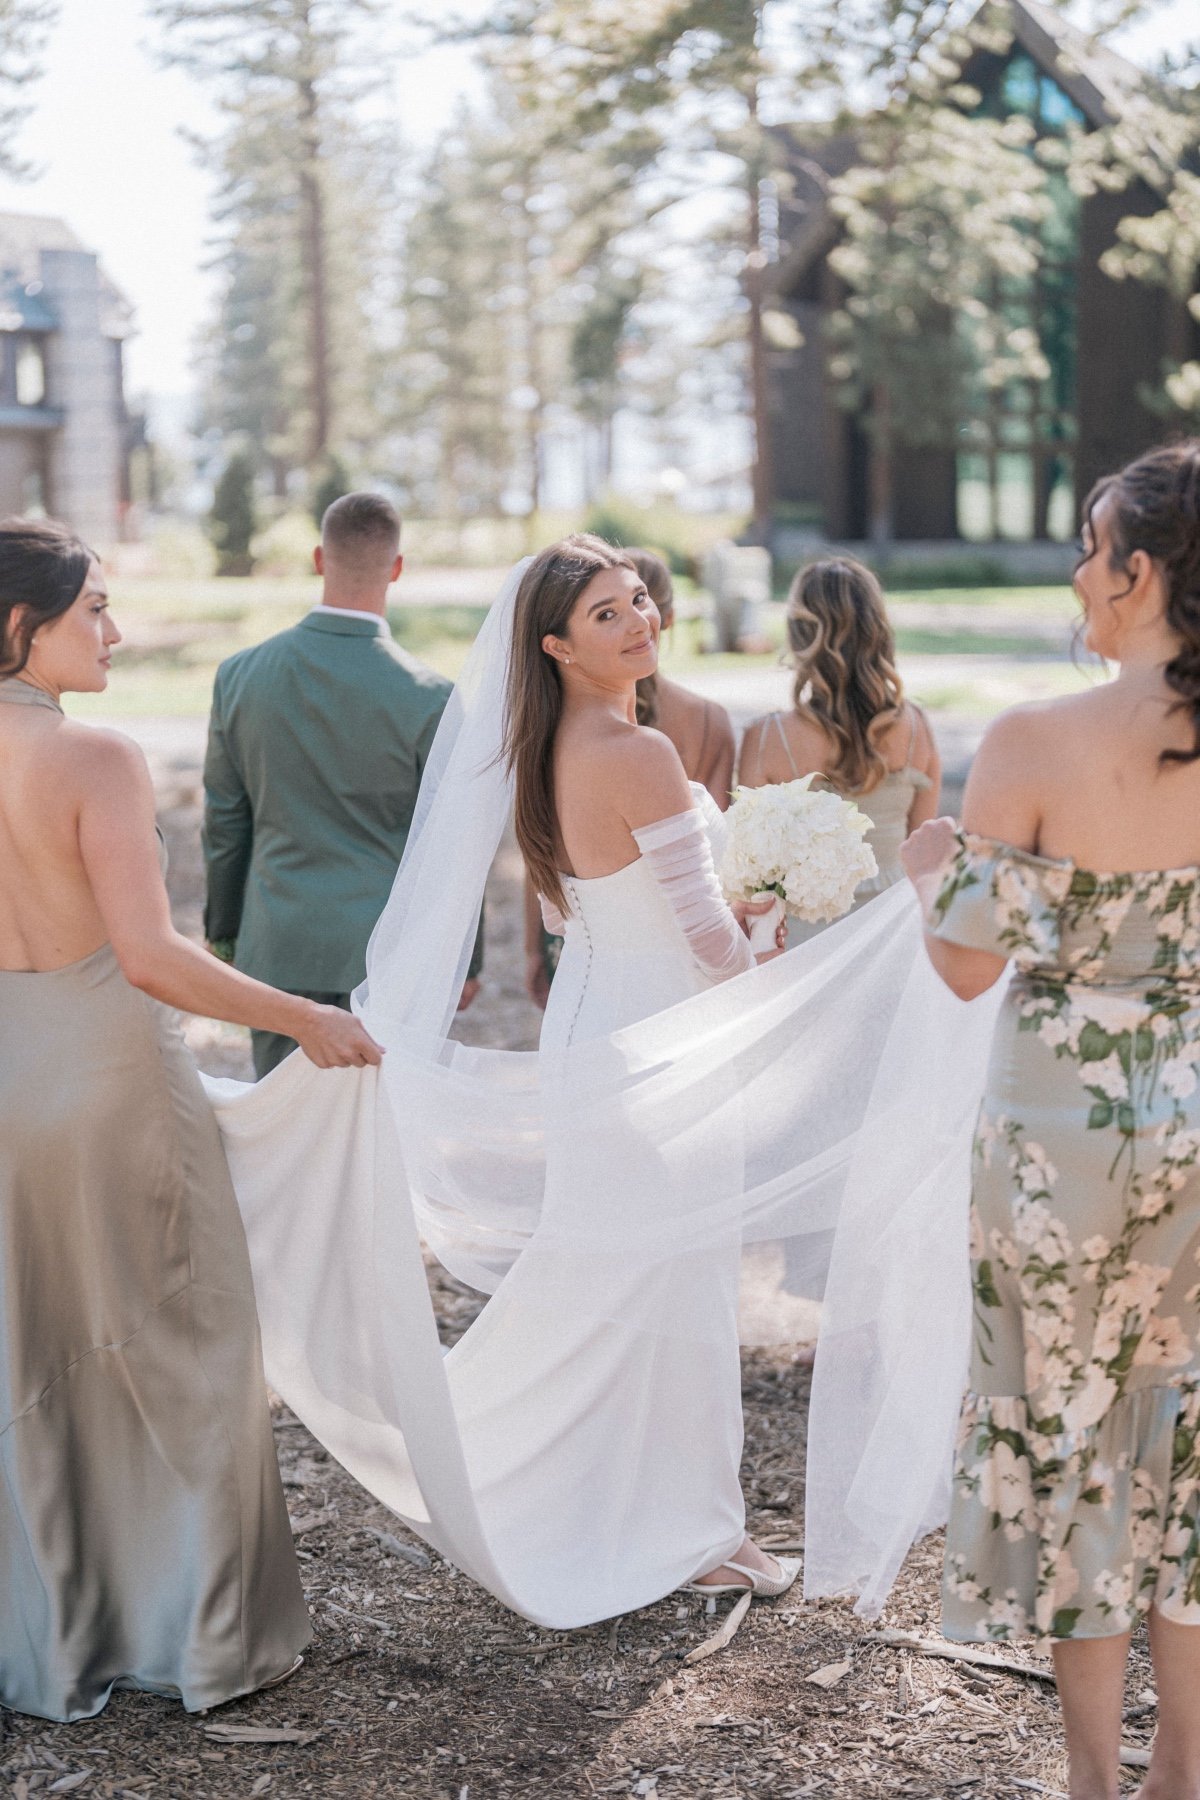 Bridal party carrying dress 